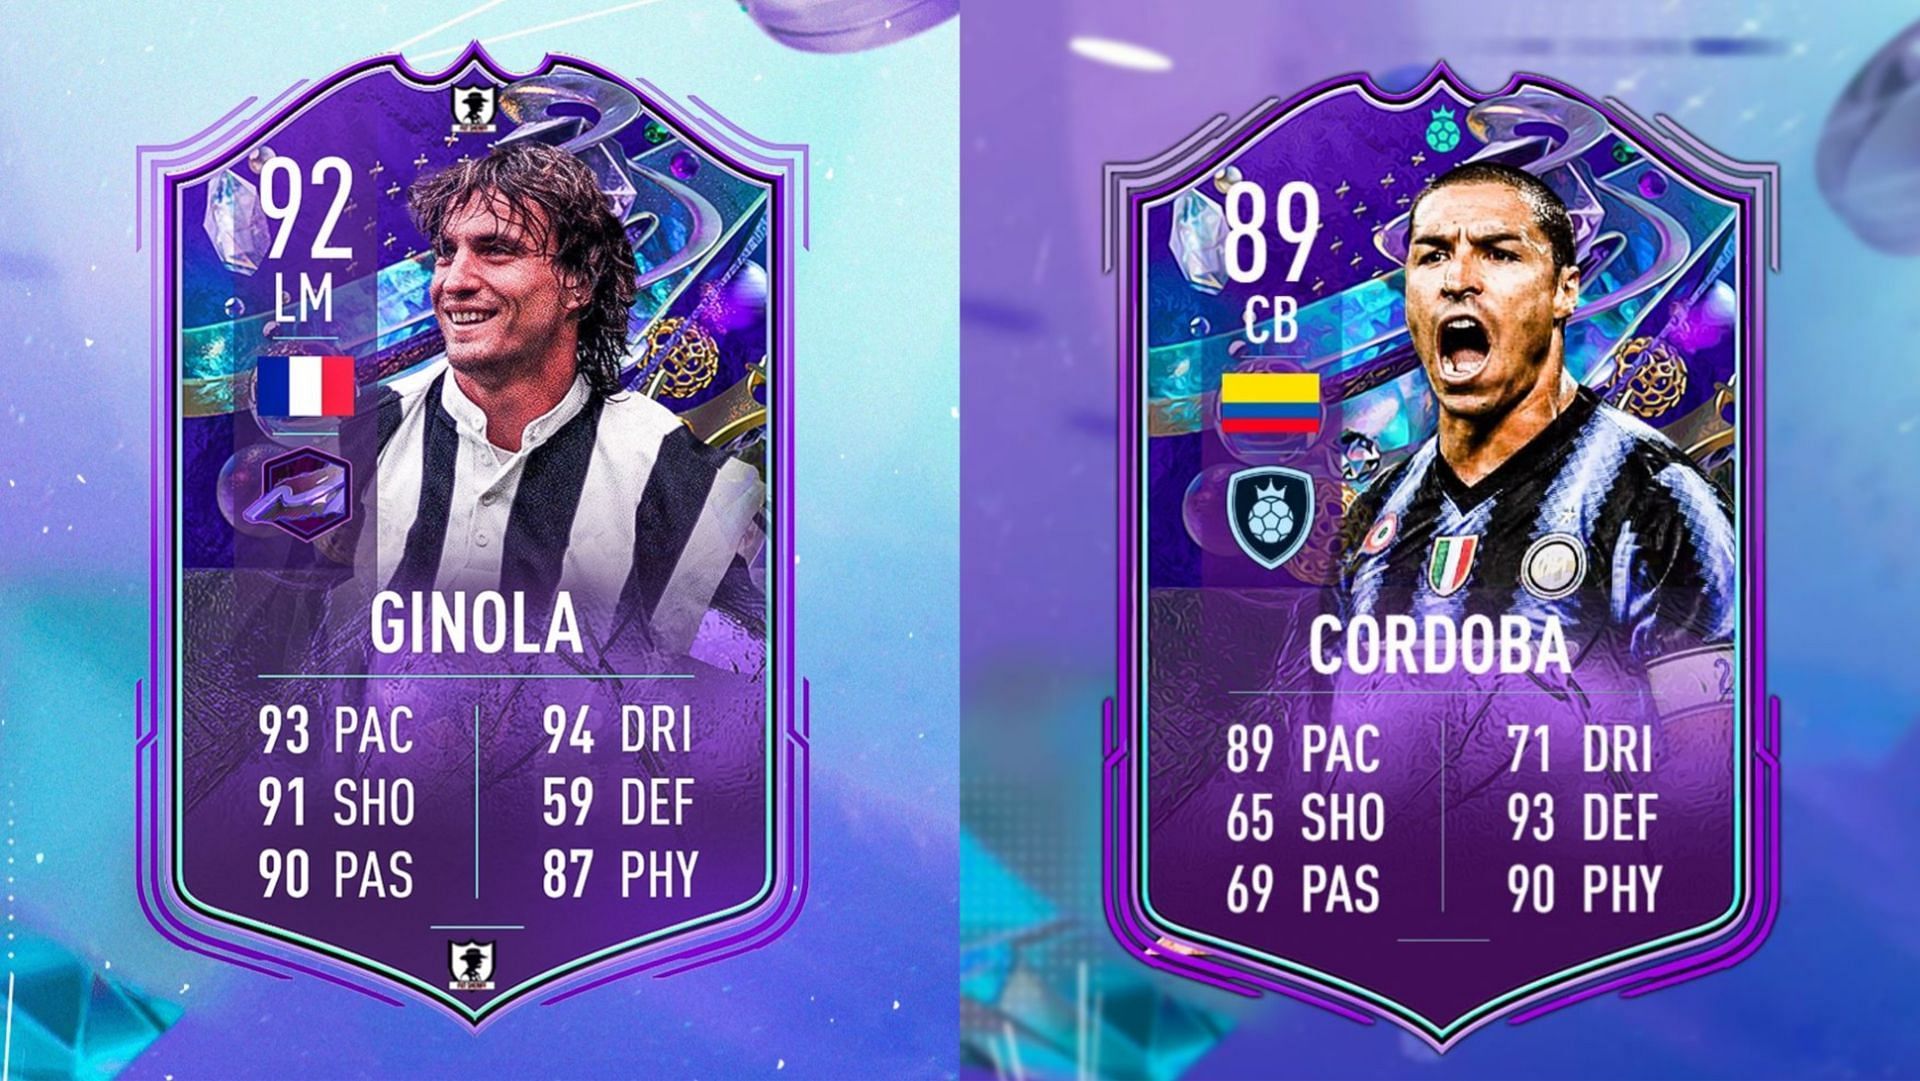 David Ginola and Ivan Cordoba&rsquo;s upcoming Fantasy FUT Heroes cards in FIFA 23 could have high demand (Images via Twitter/FUT Sheriff, FTR)